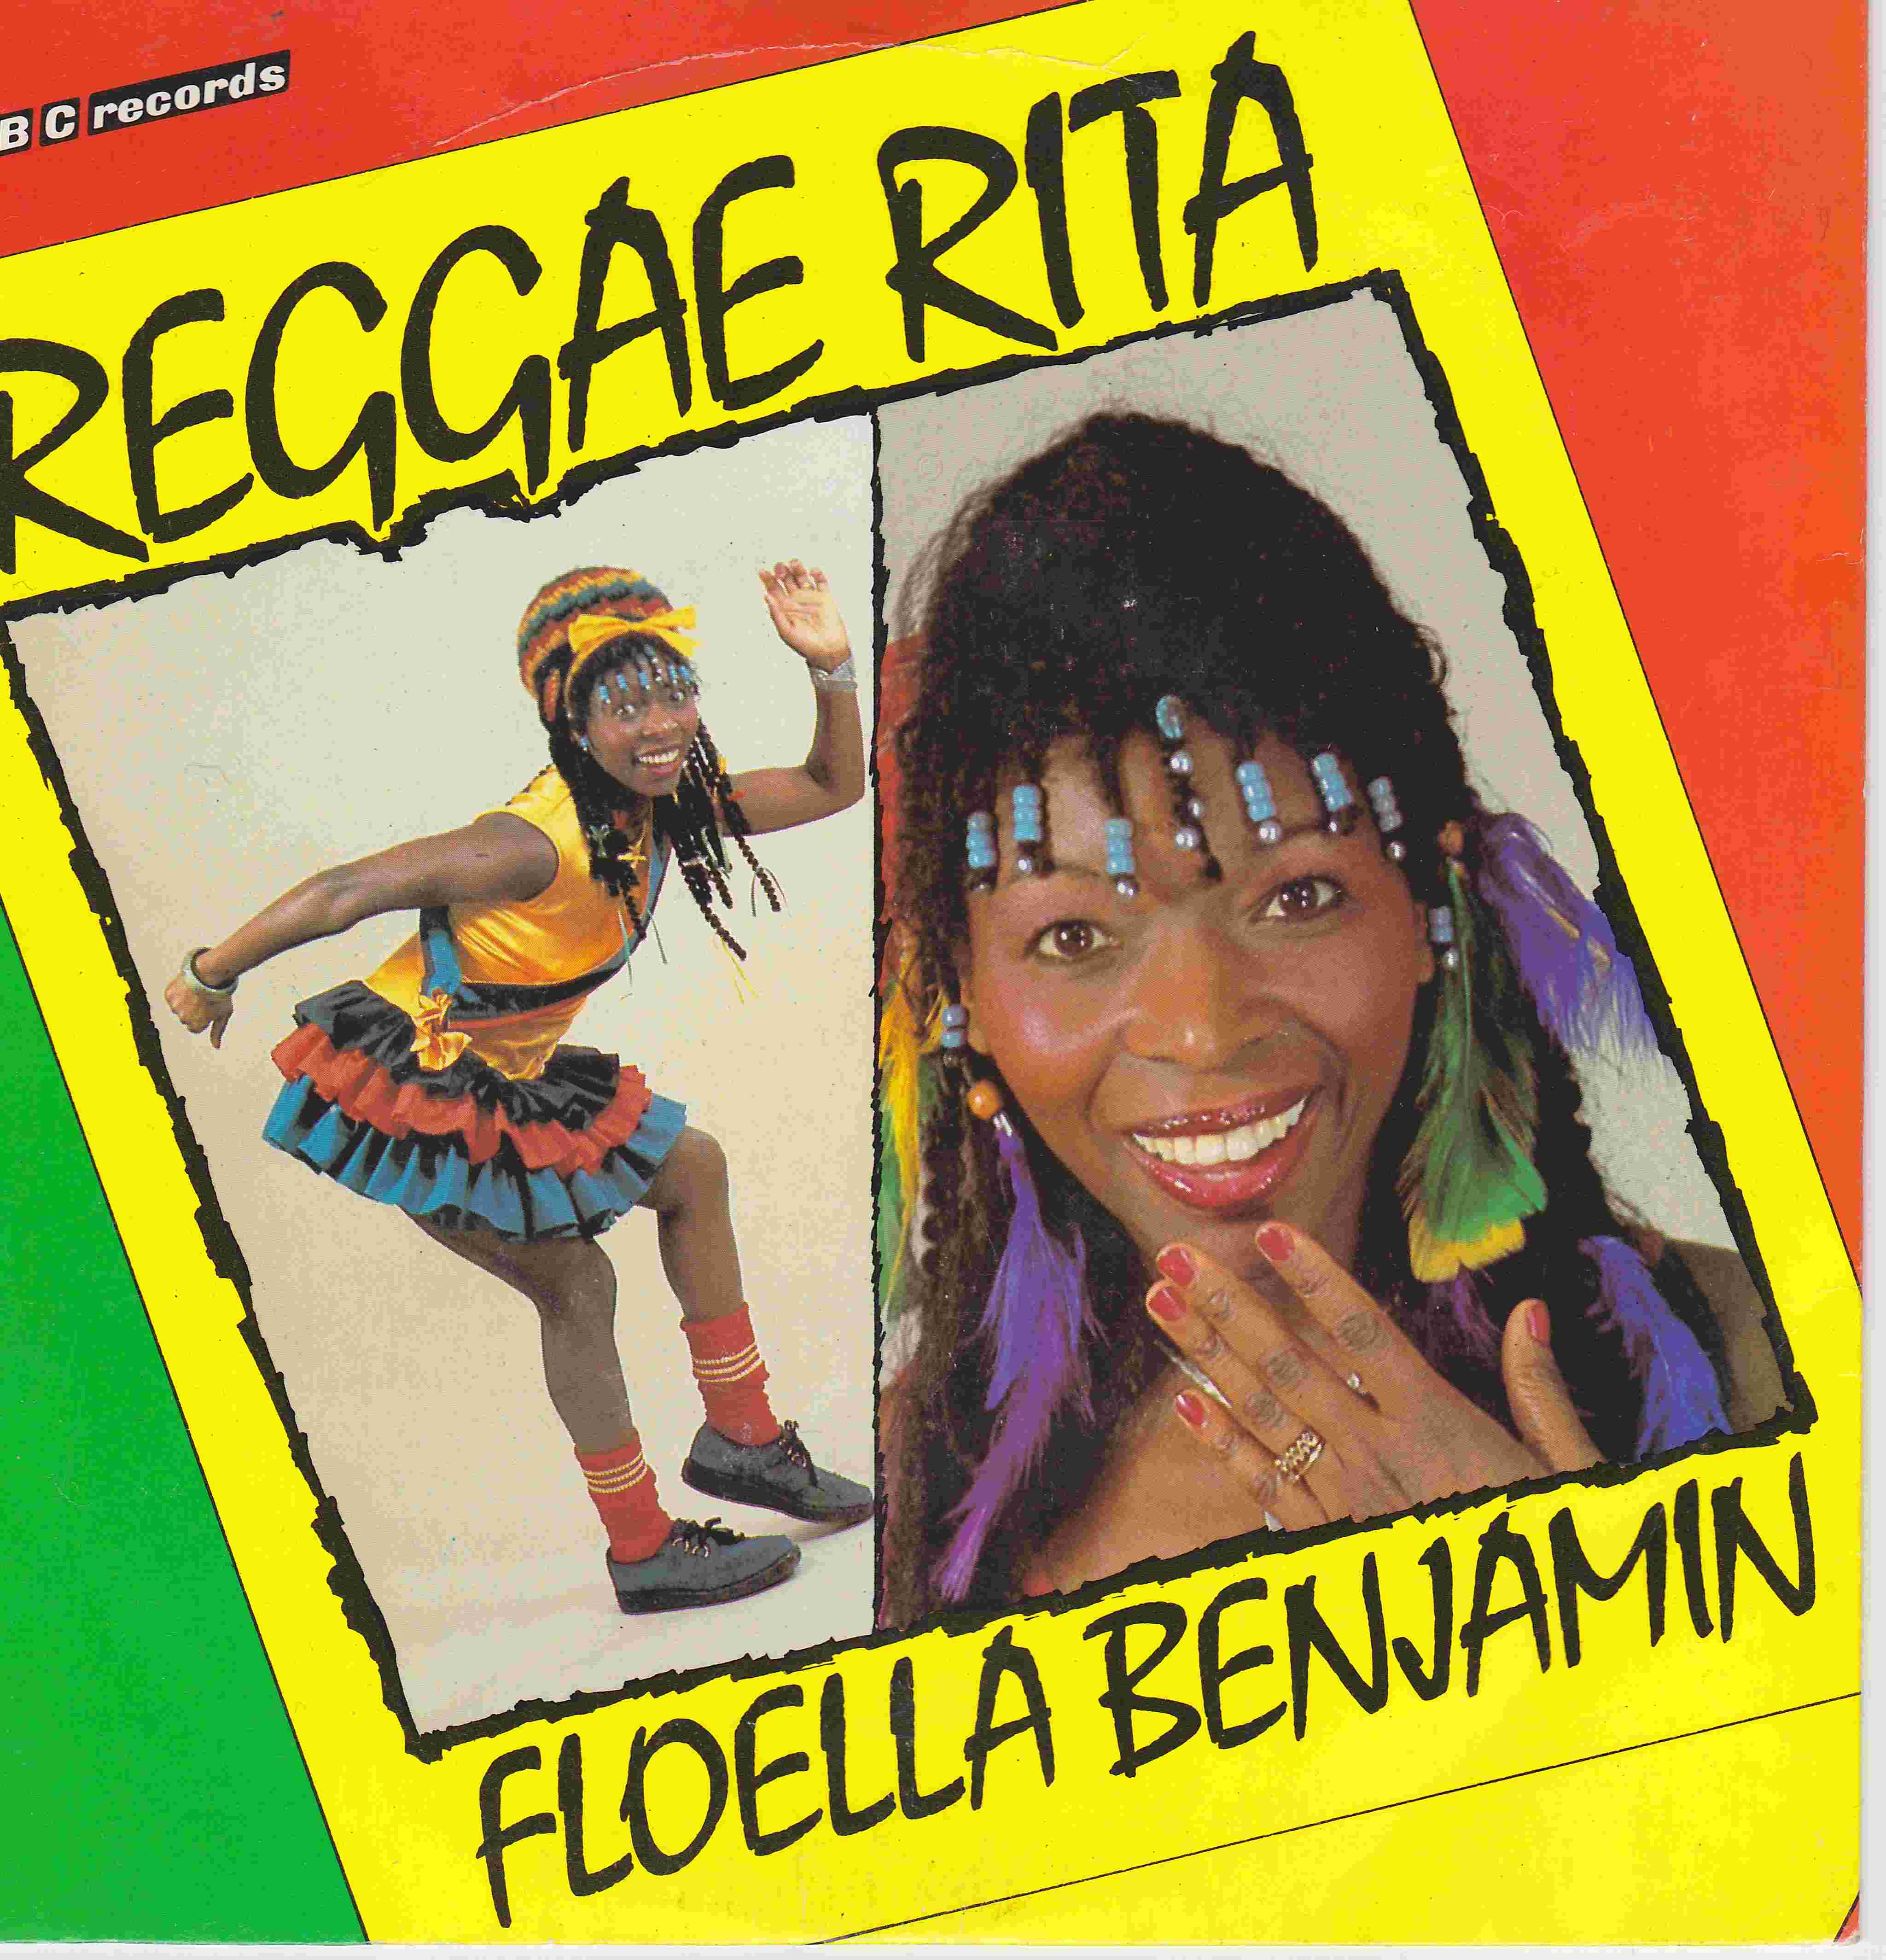 Picture of RESL 142 Reggae Rita by artist Floella Benjamin / Dr. Dread Gosling (Peter Gosling) from the BBC singles - Records and Tapes library